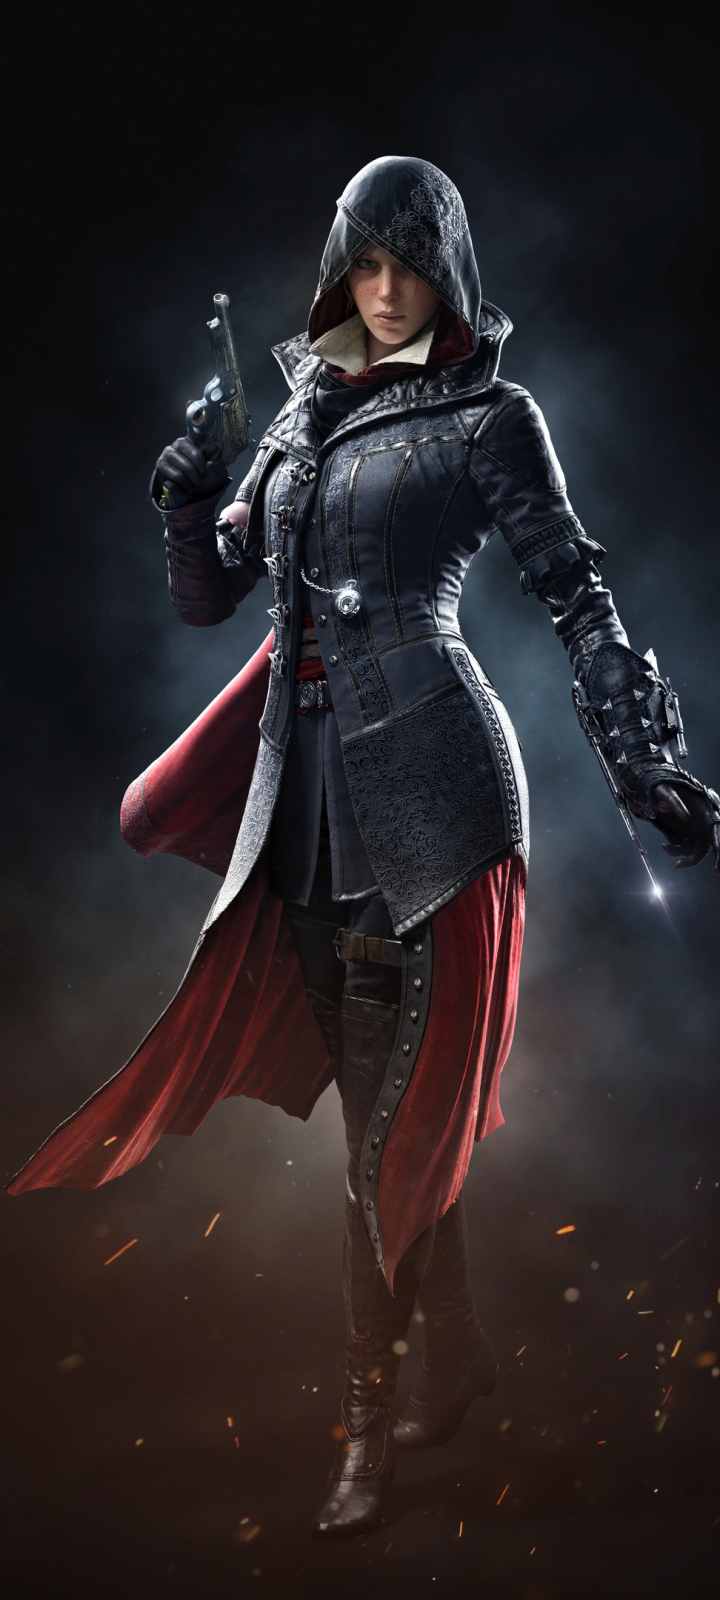  Evie Frye HQ Background Images